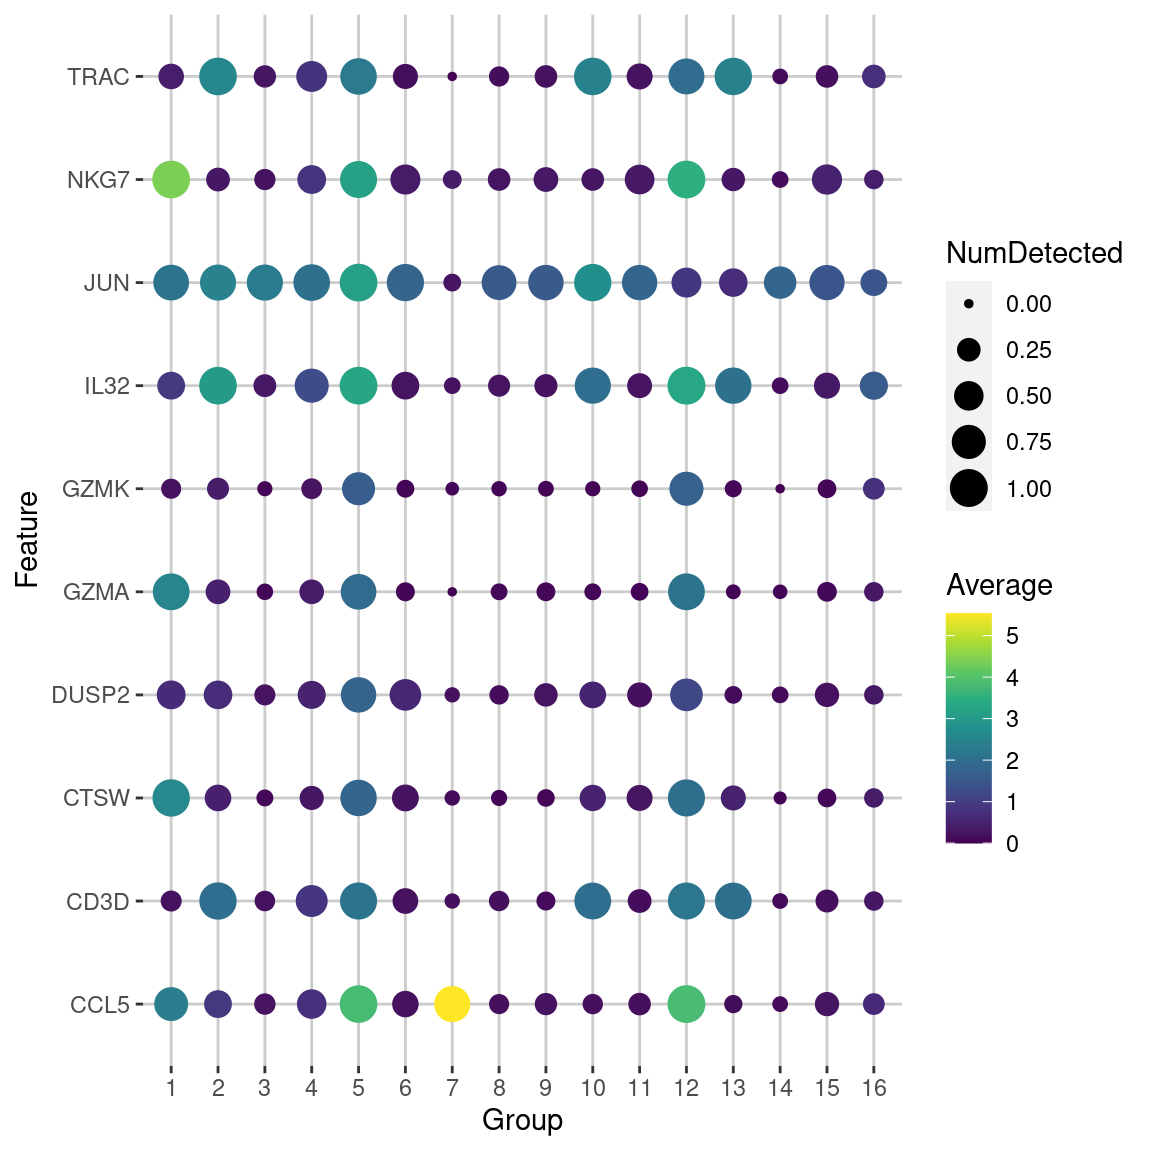 Dot plot of the top potential marker genes (as determined by the mean AUC) for cluster 5 in the PBMC dataset. Each row corrresponds to a marker gene and each column corresponds to a cluster. The size of each dot represents the proportion of cells with detected expression of the gene in the cluster, while the color is proportional to the average expression across all cells in that cluster.